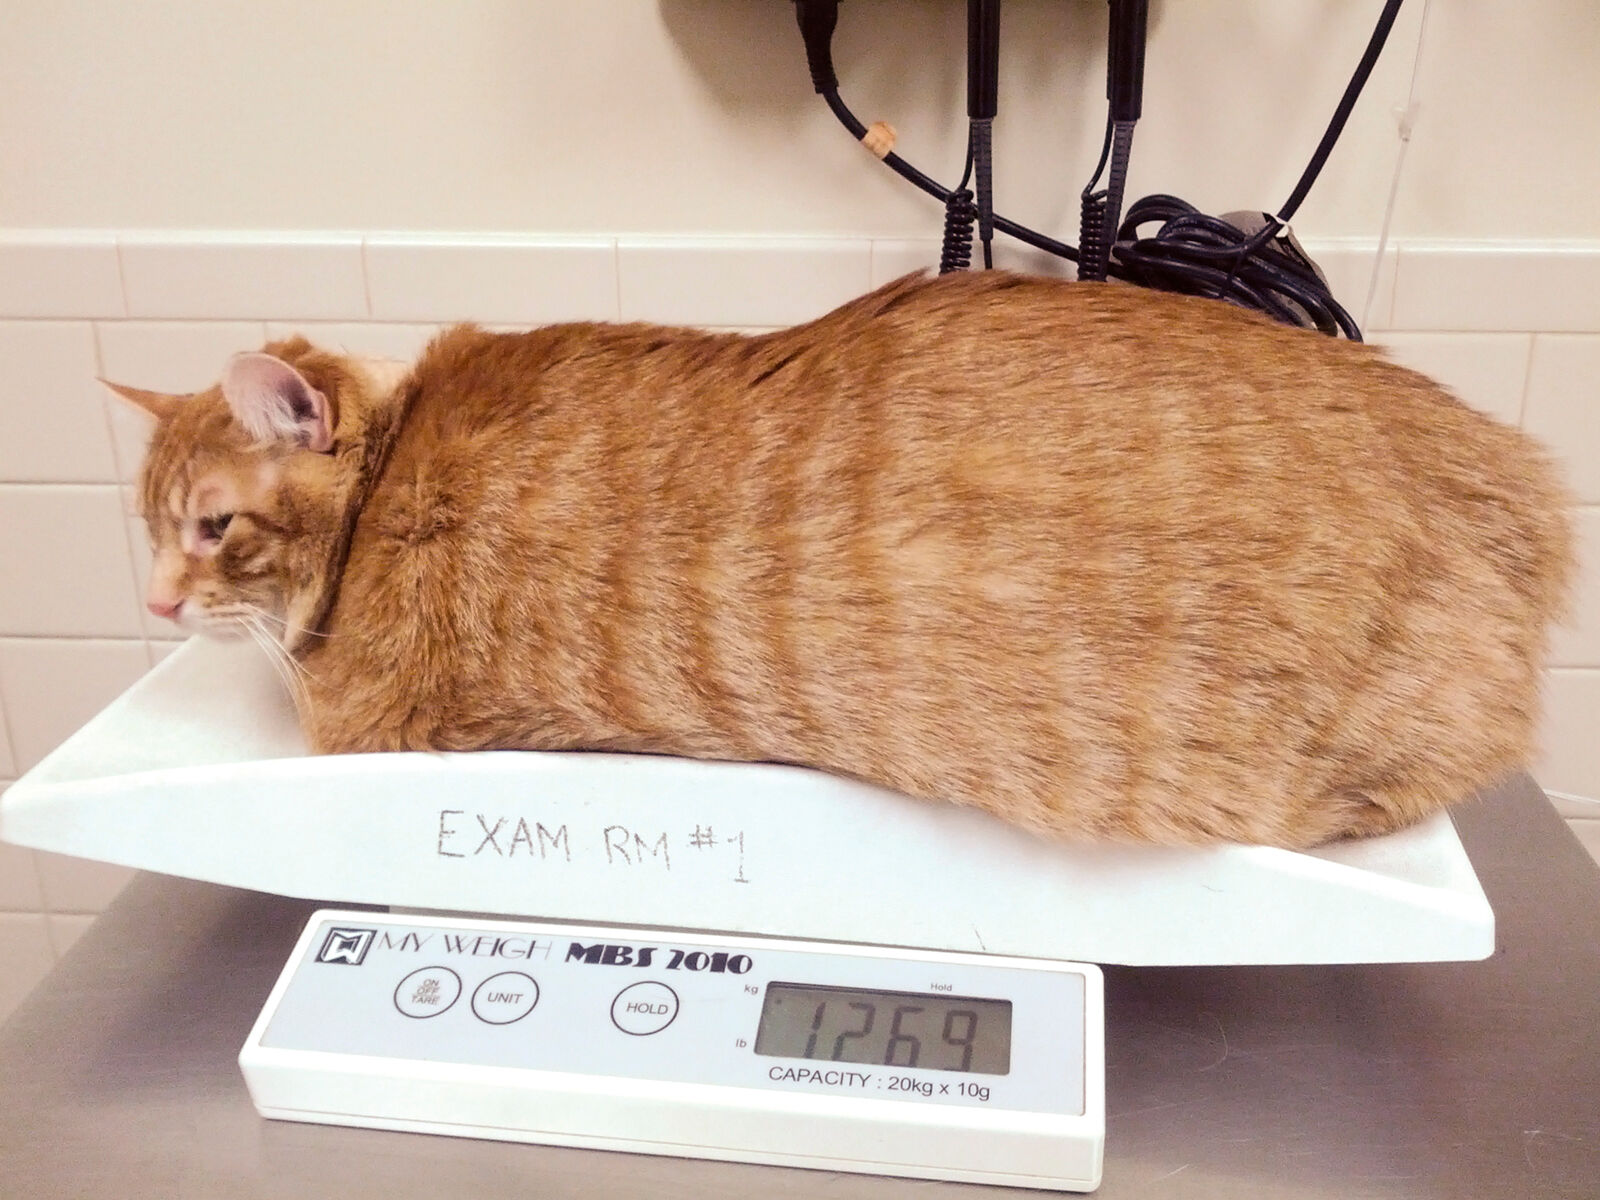 Caloric density is much more of a concern than carbohydrate content when it comes to feline obesity